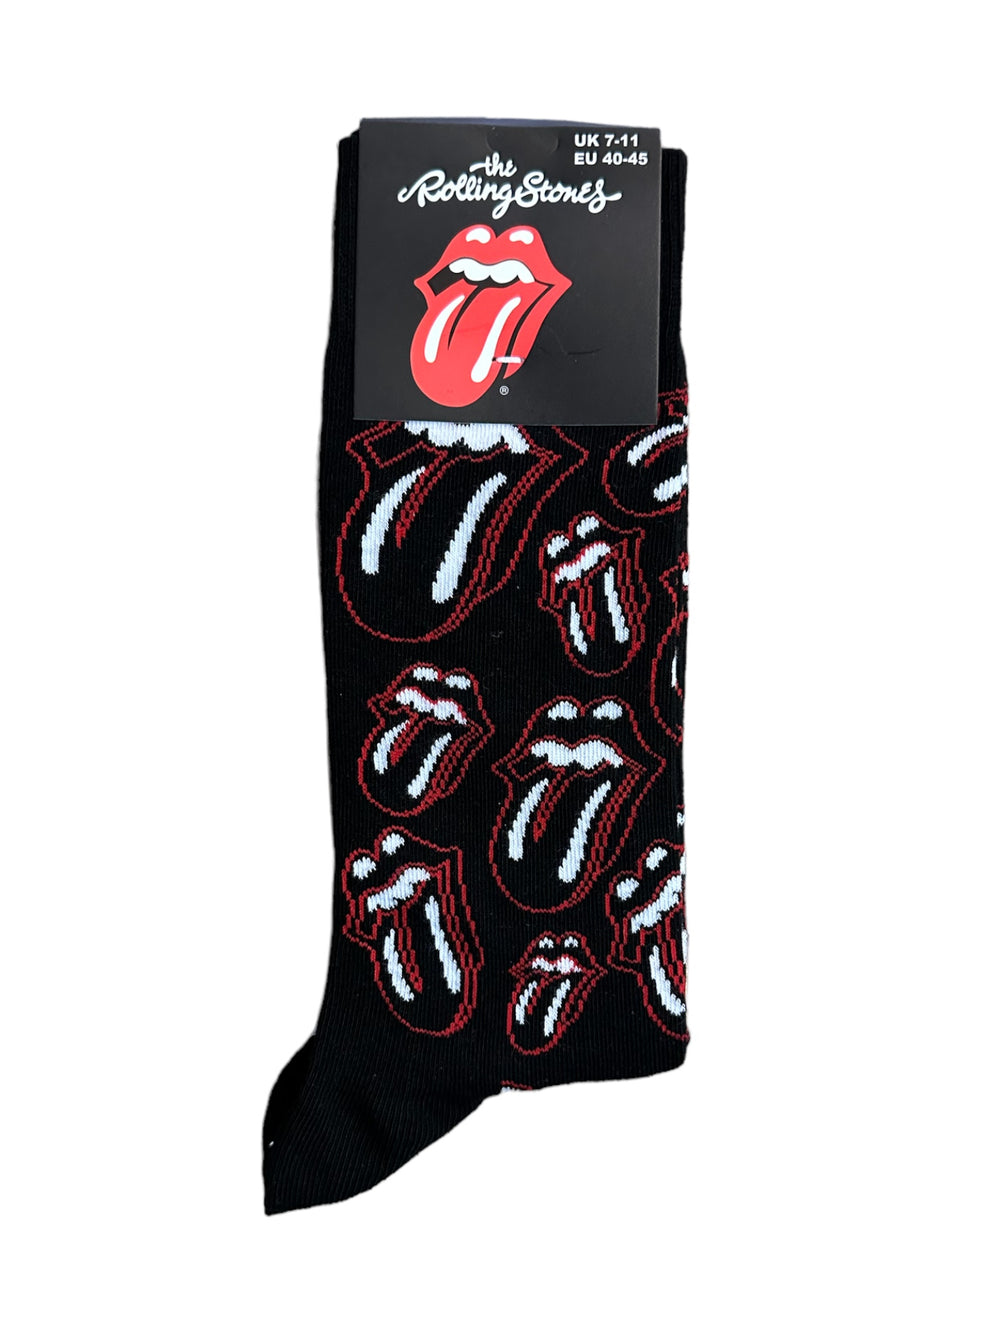 Rolling Stones - The Outline Tongues Black: Official Product 1 Pair Jacquard Socks NEW